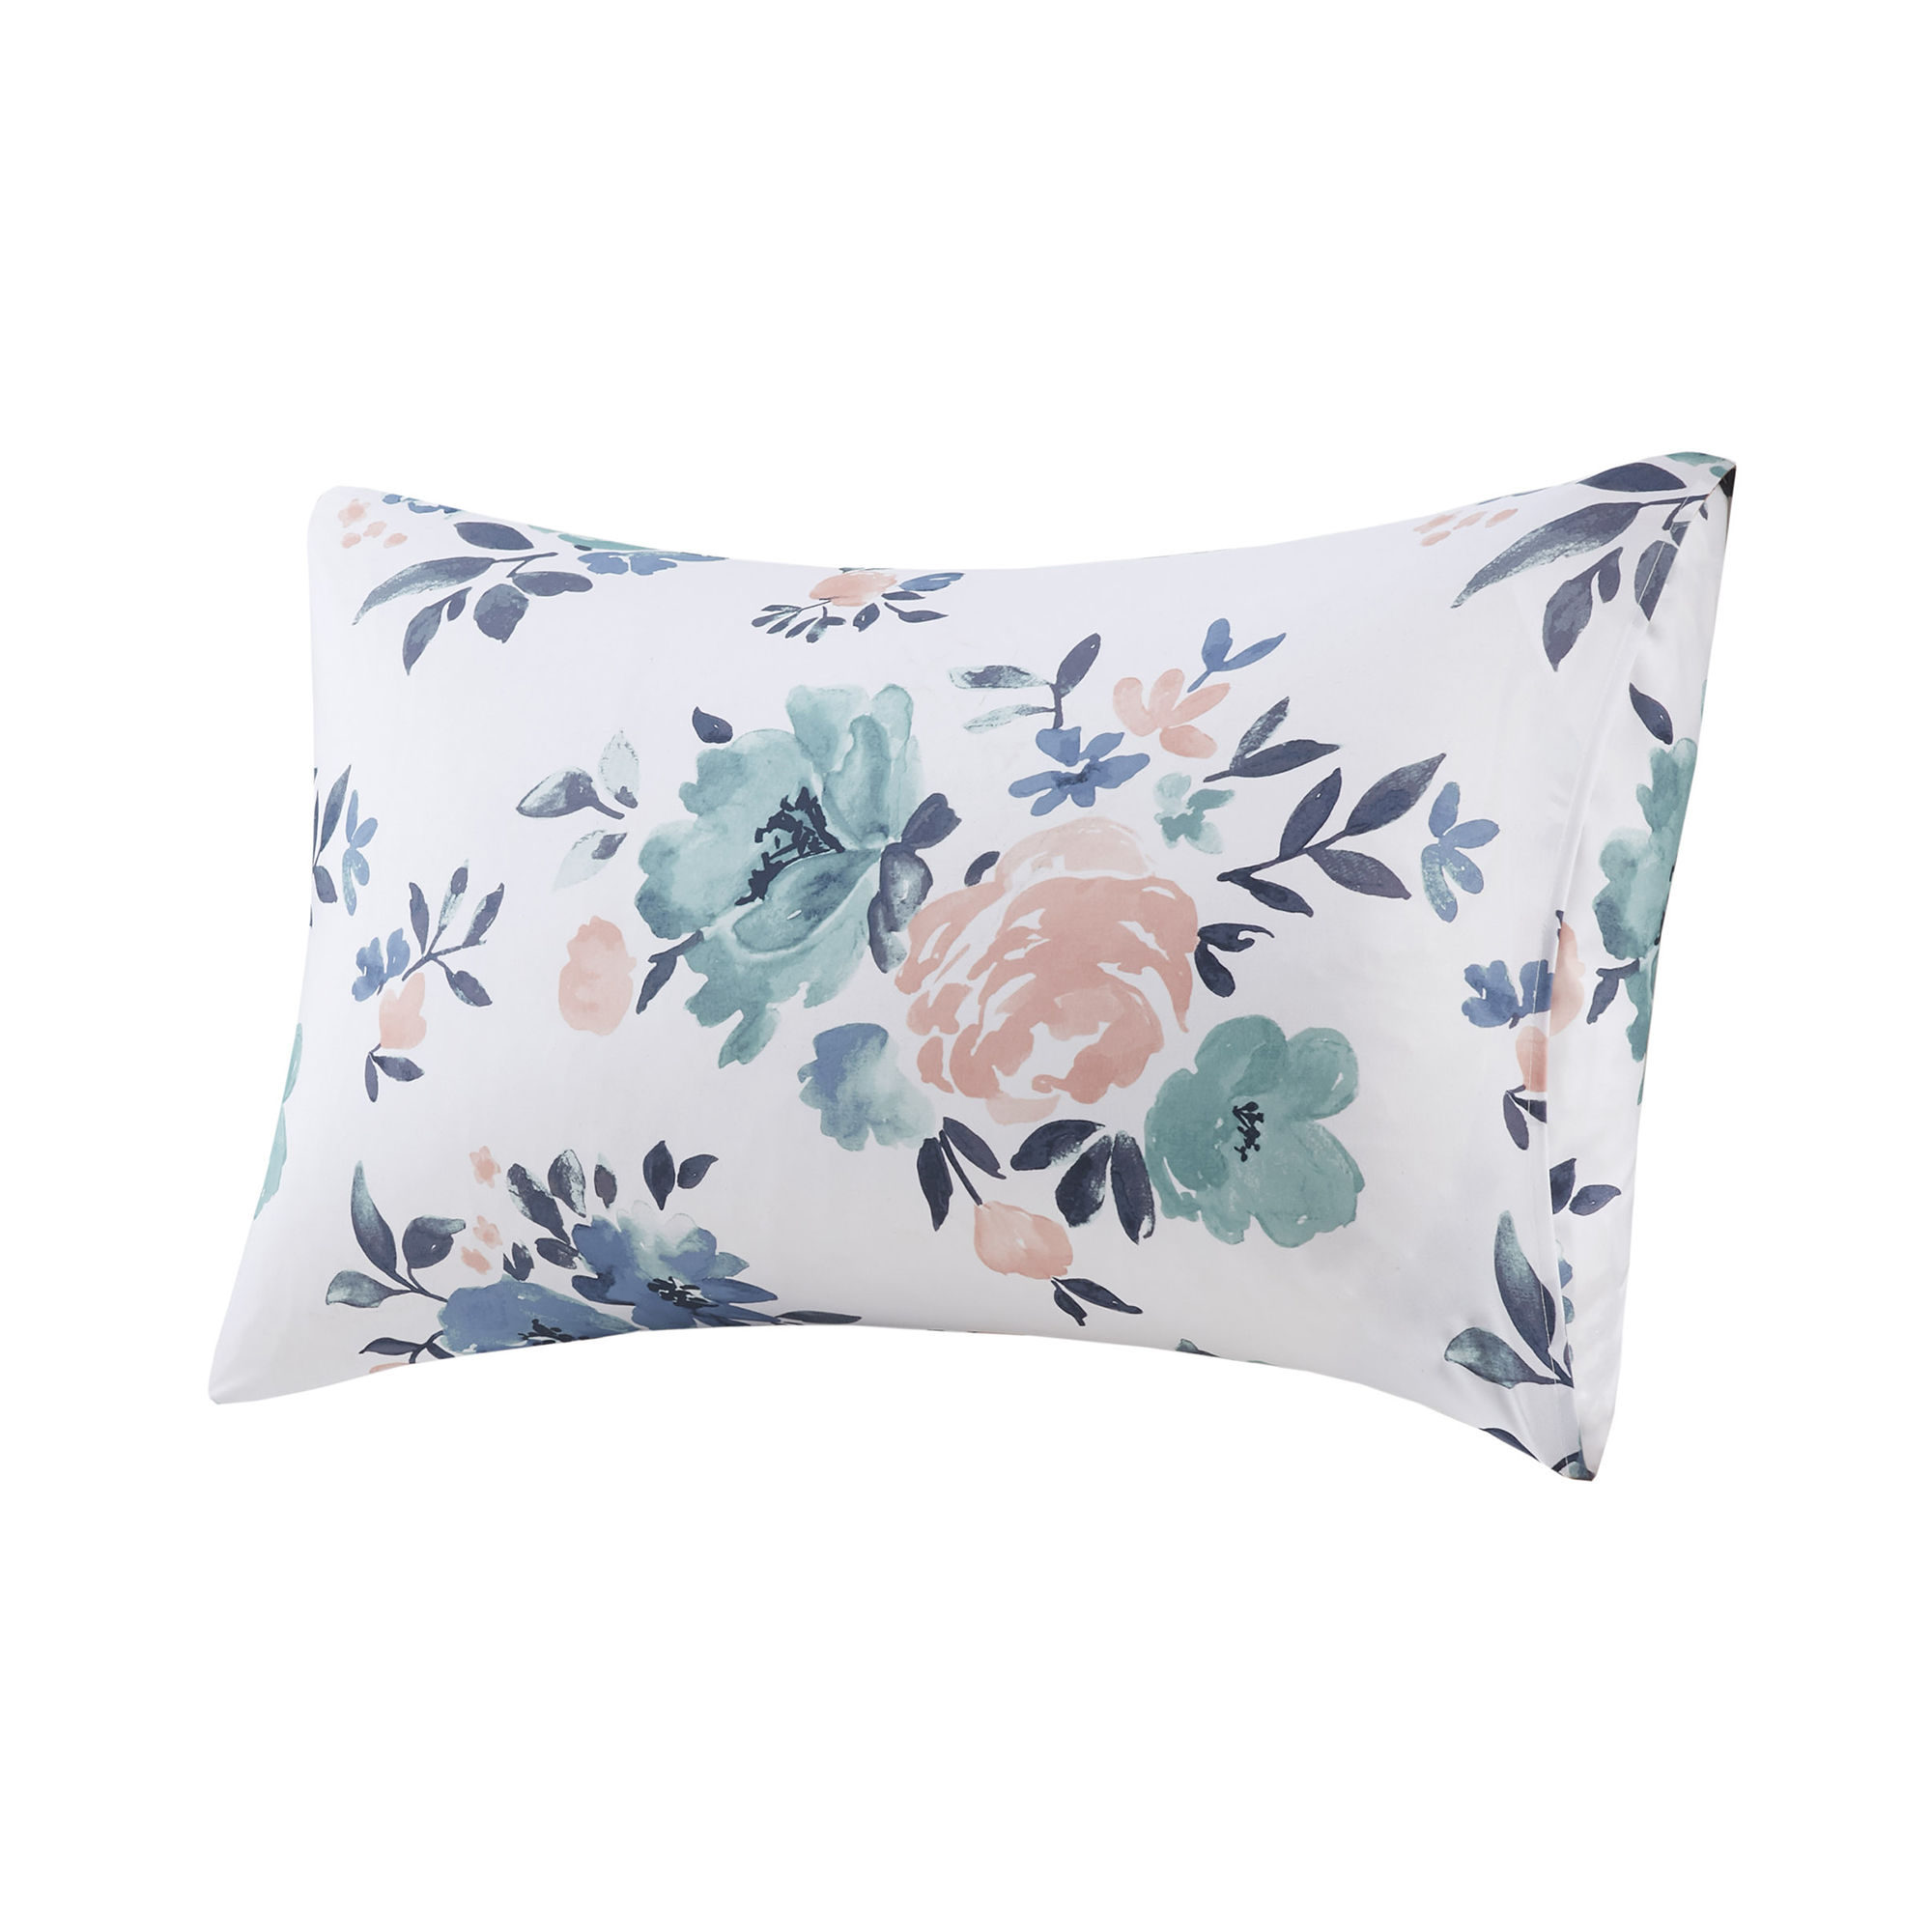 Mainstays Woven Printed Floral Microfiber Standard Pillowcase Cover, 20 ...